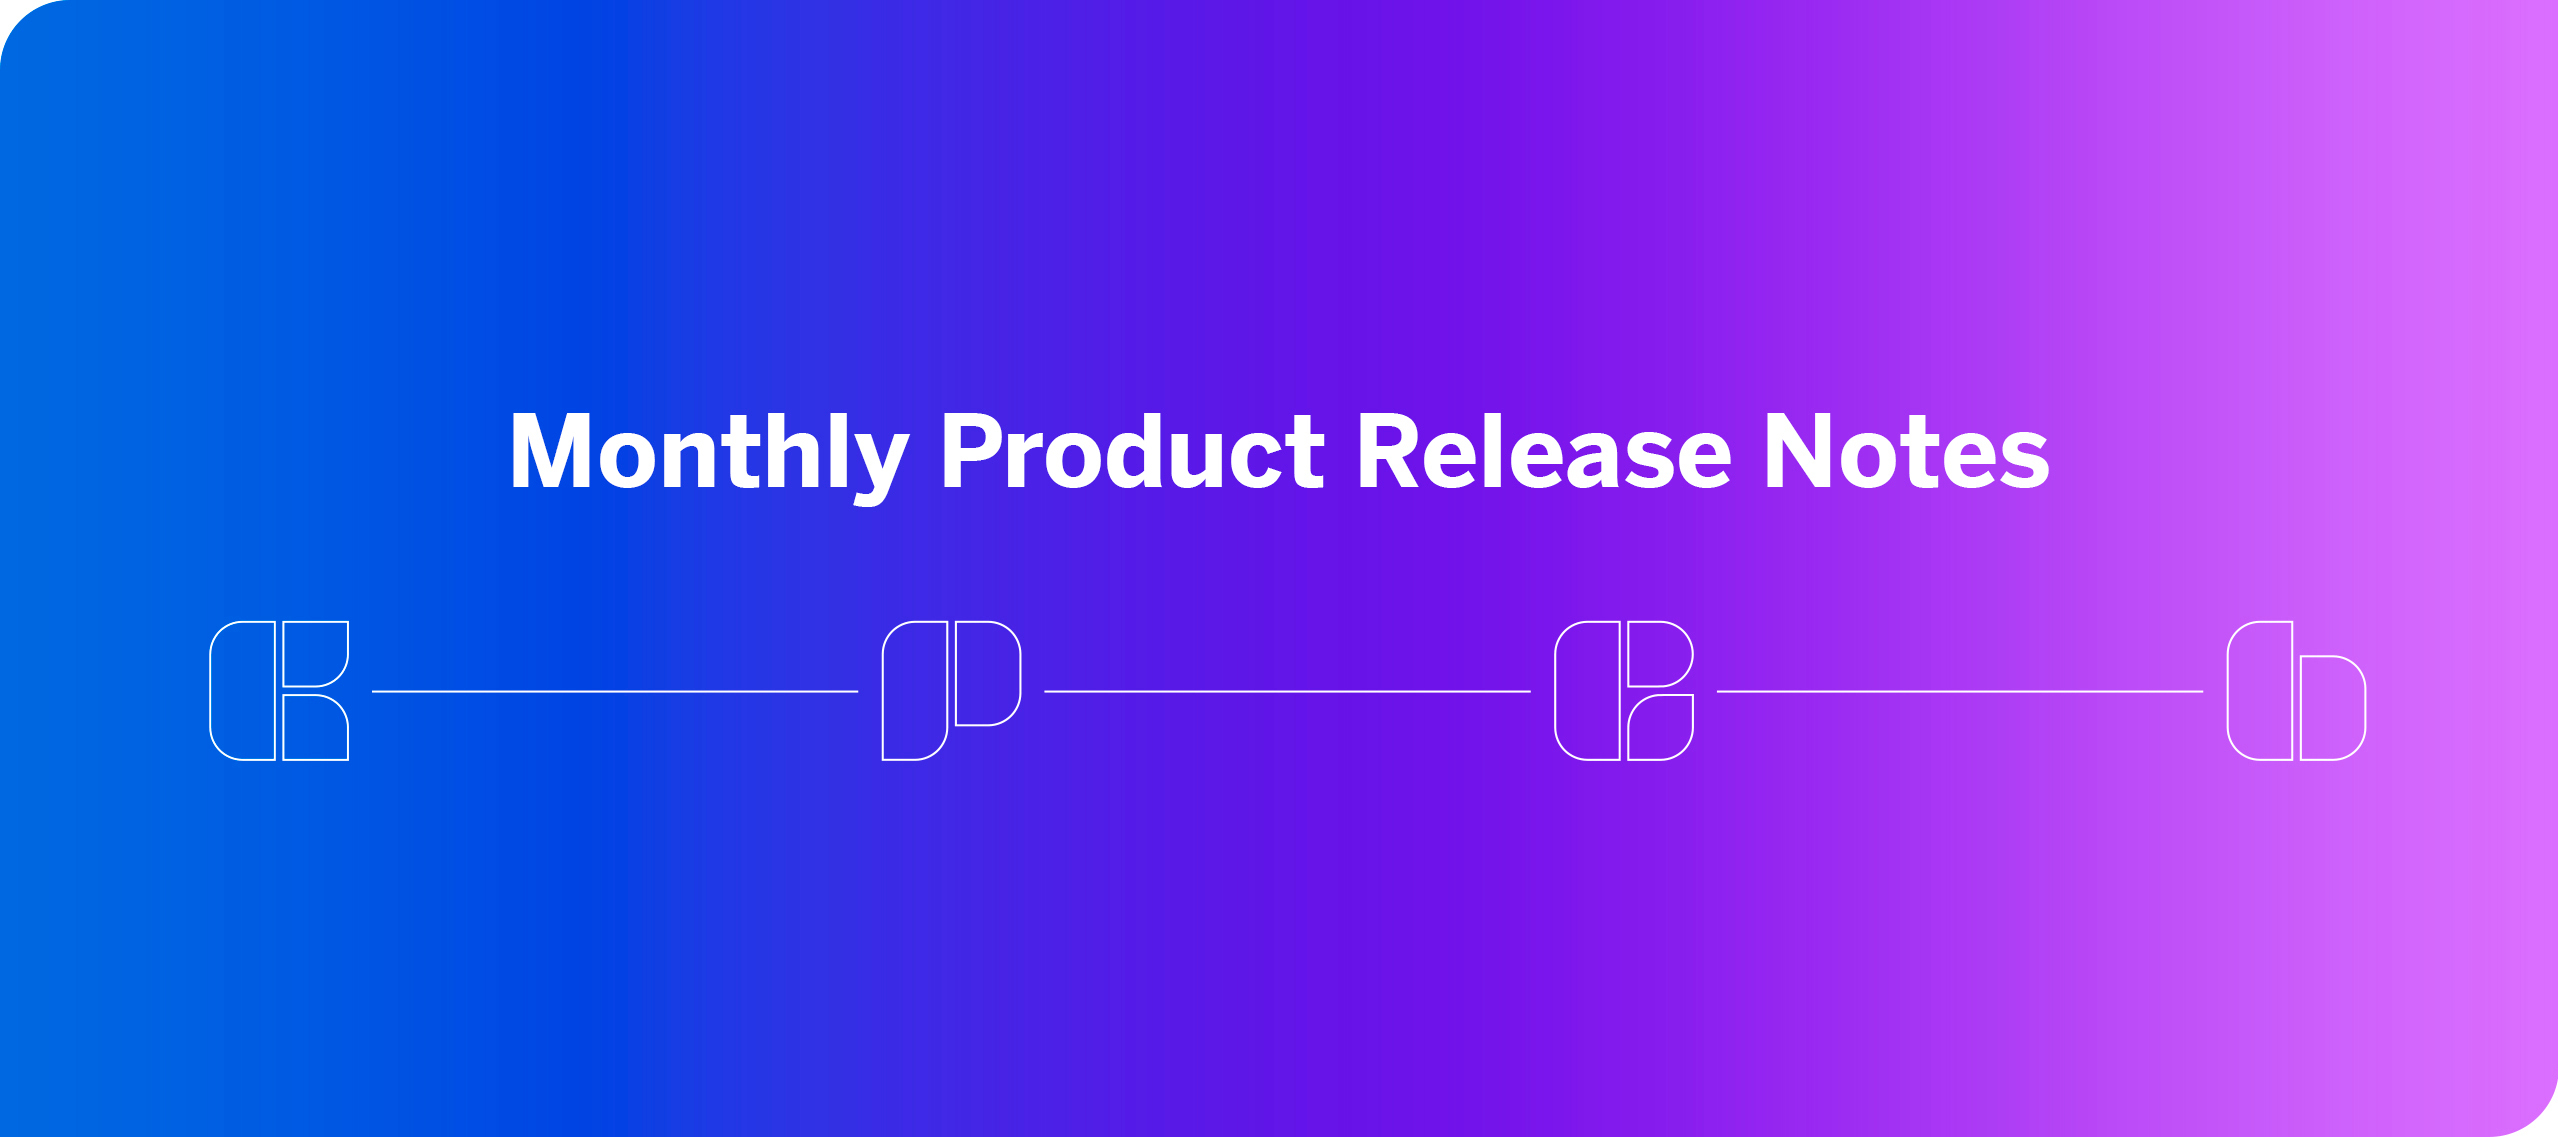 Monthly Product Release Notes - February 9, 2023 to March 8, 2023